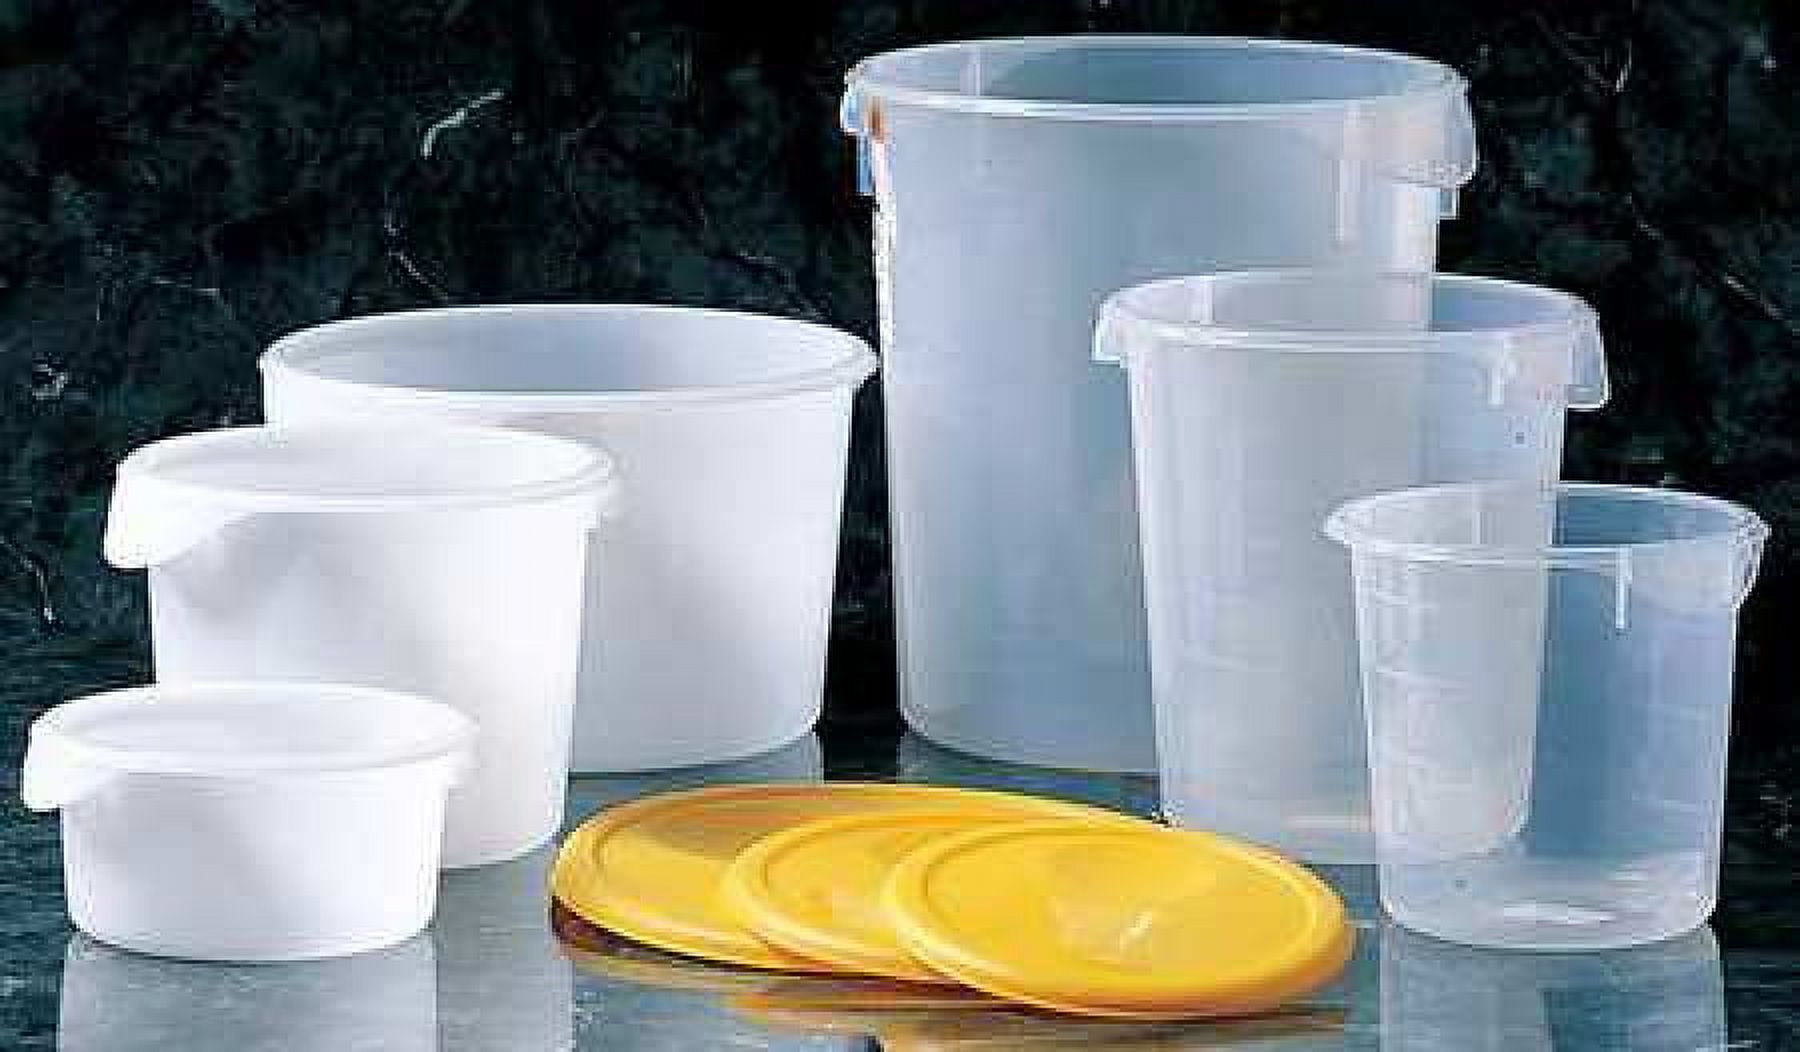 4 Quart Rubbermaid Round Food Containers